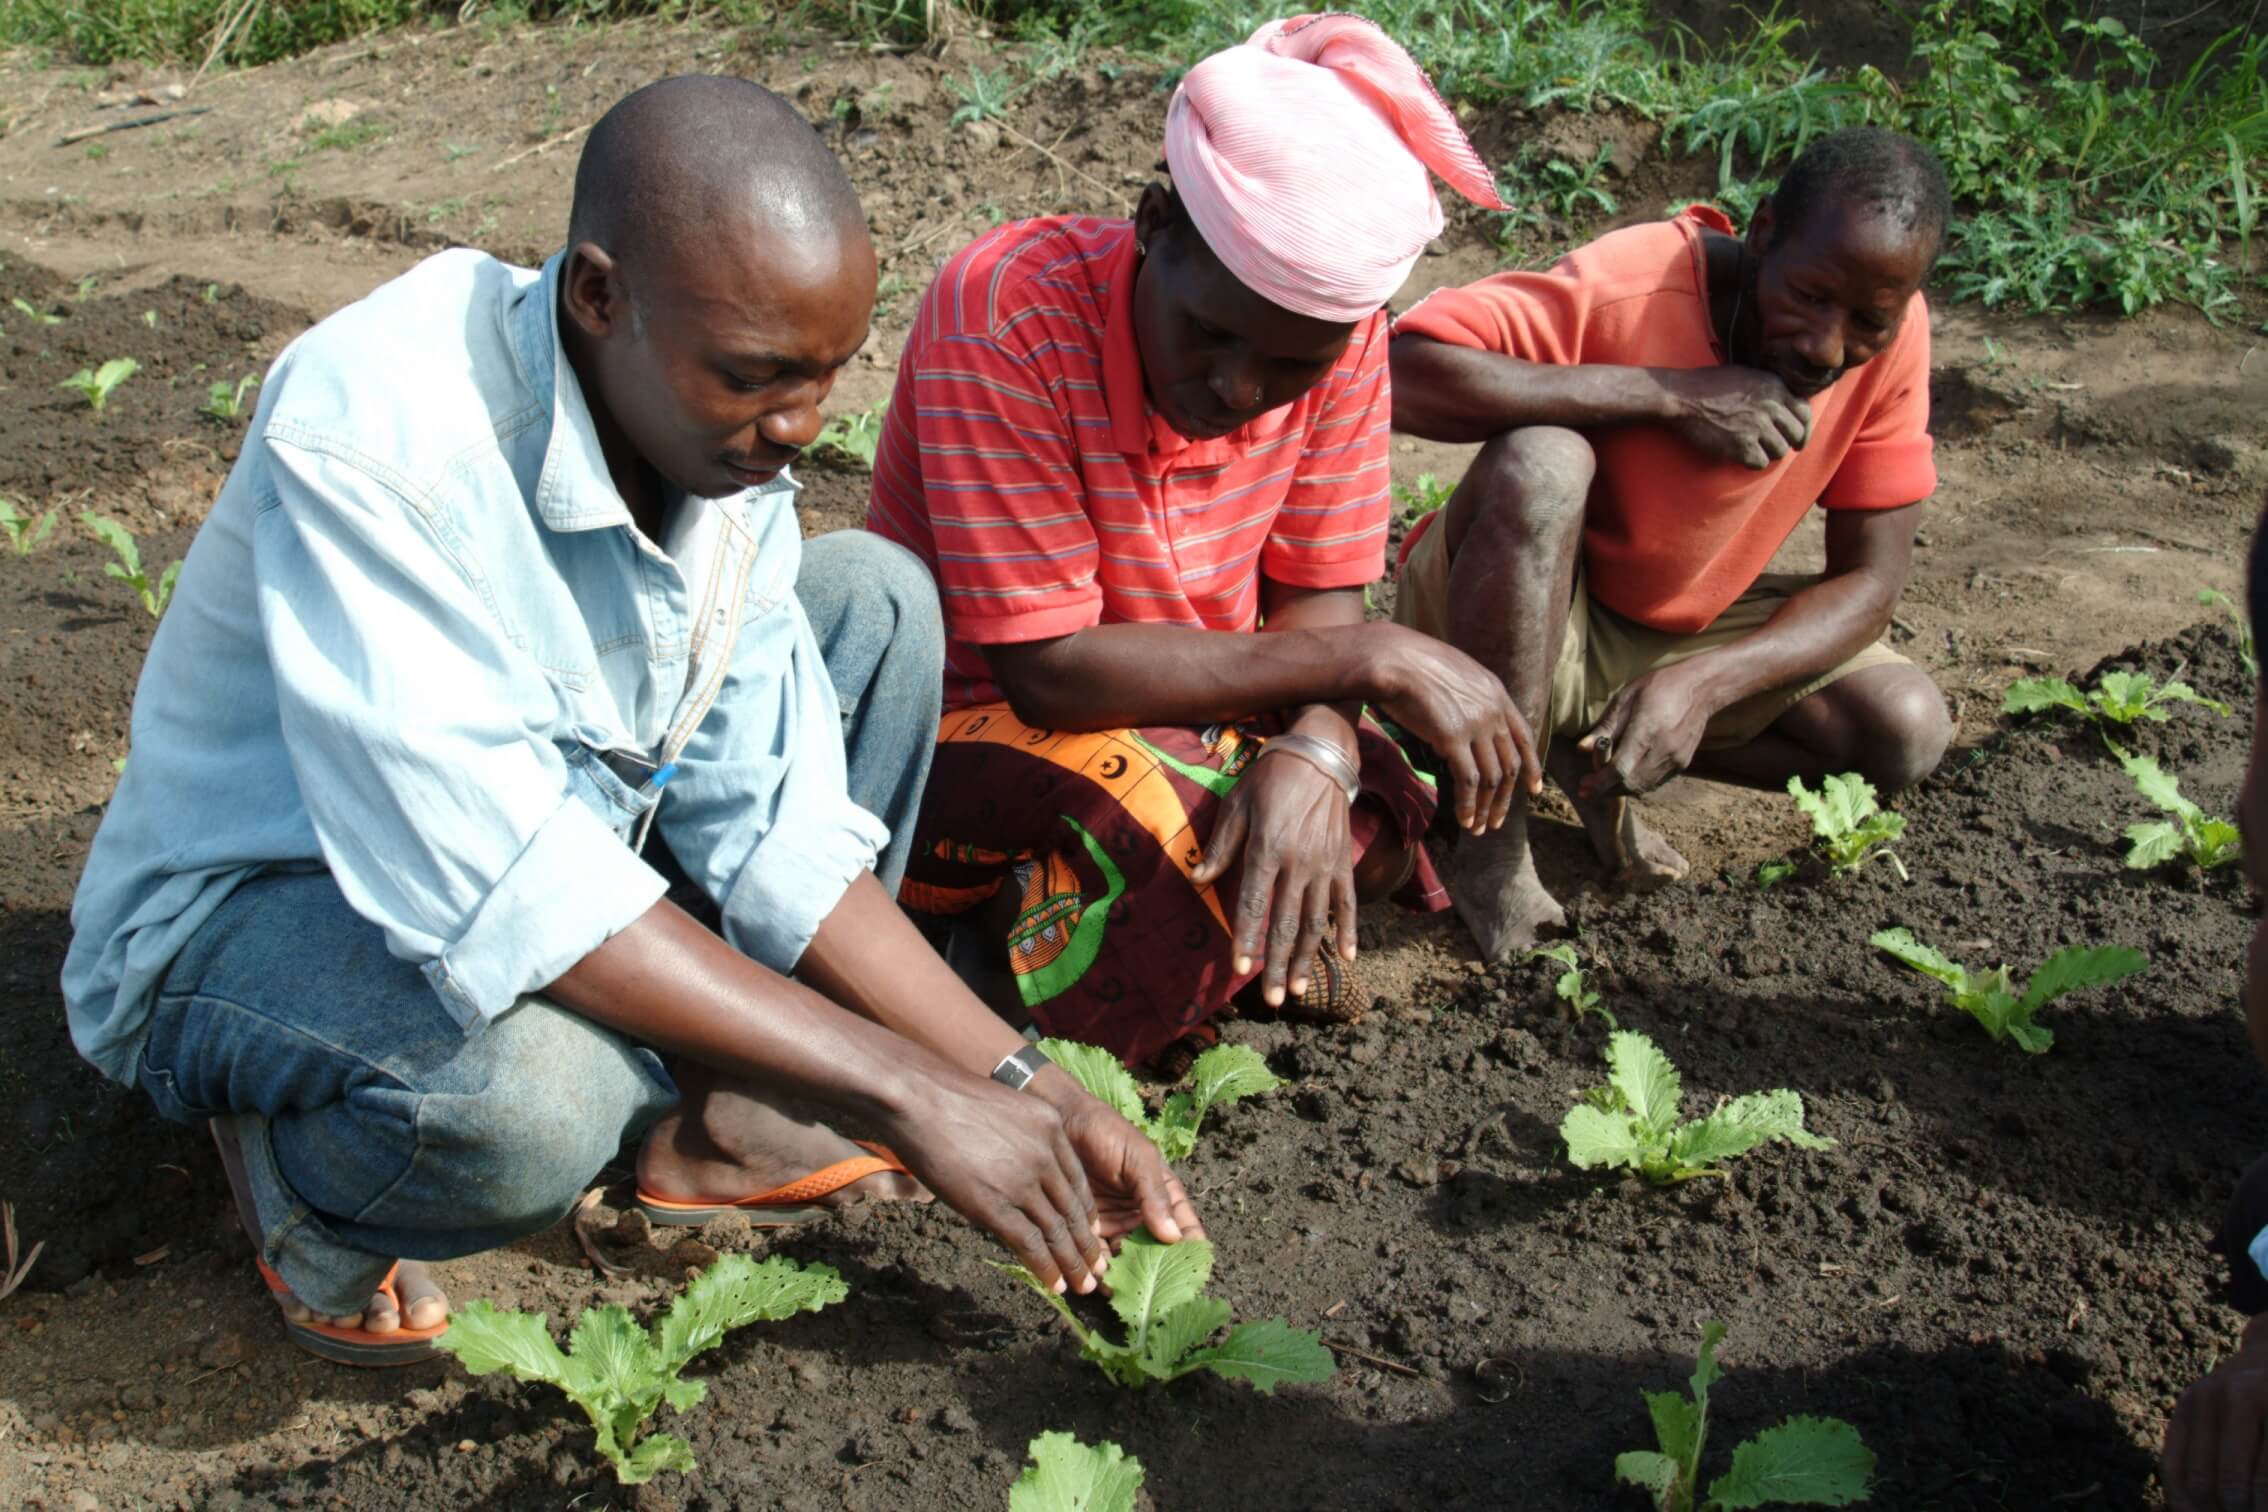 Students learn agricultural techniques at the Bilibiza Agricultural Institute in Mozambique